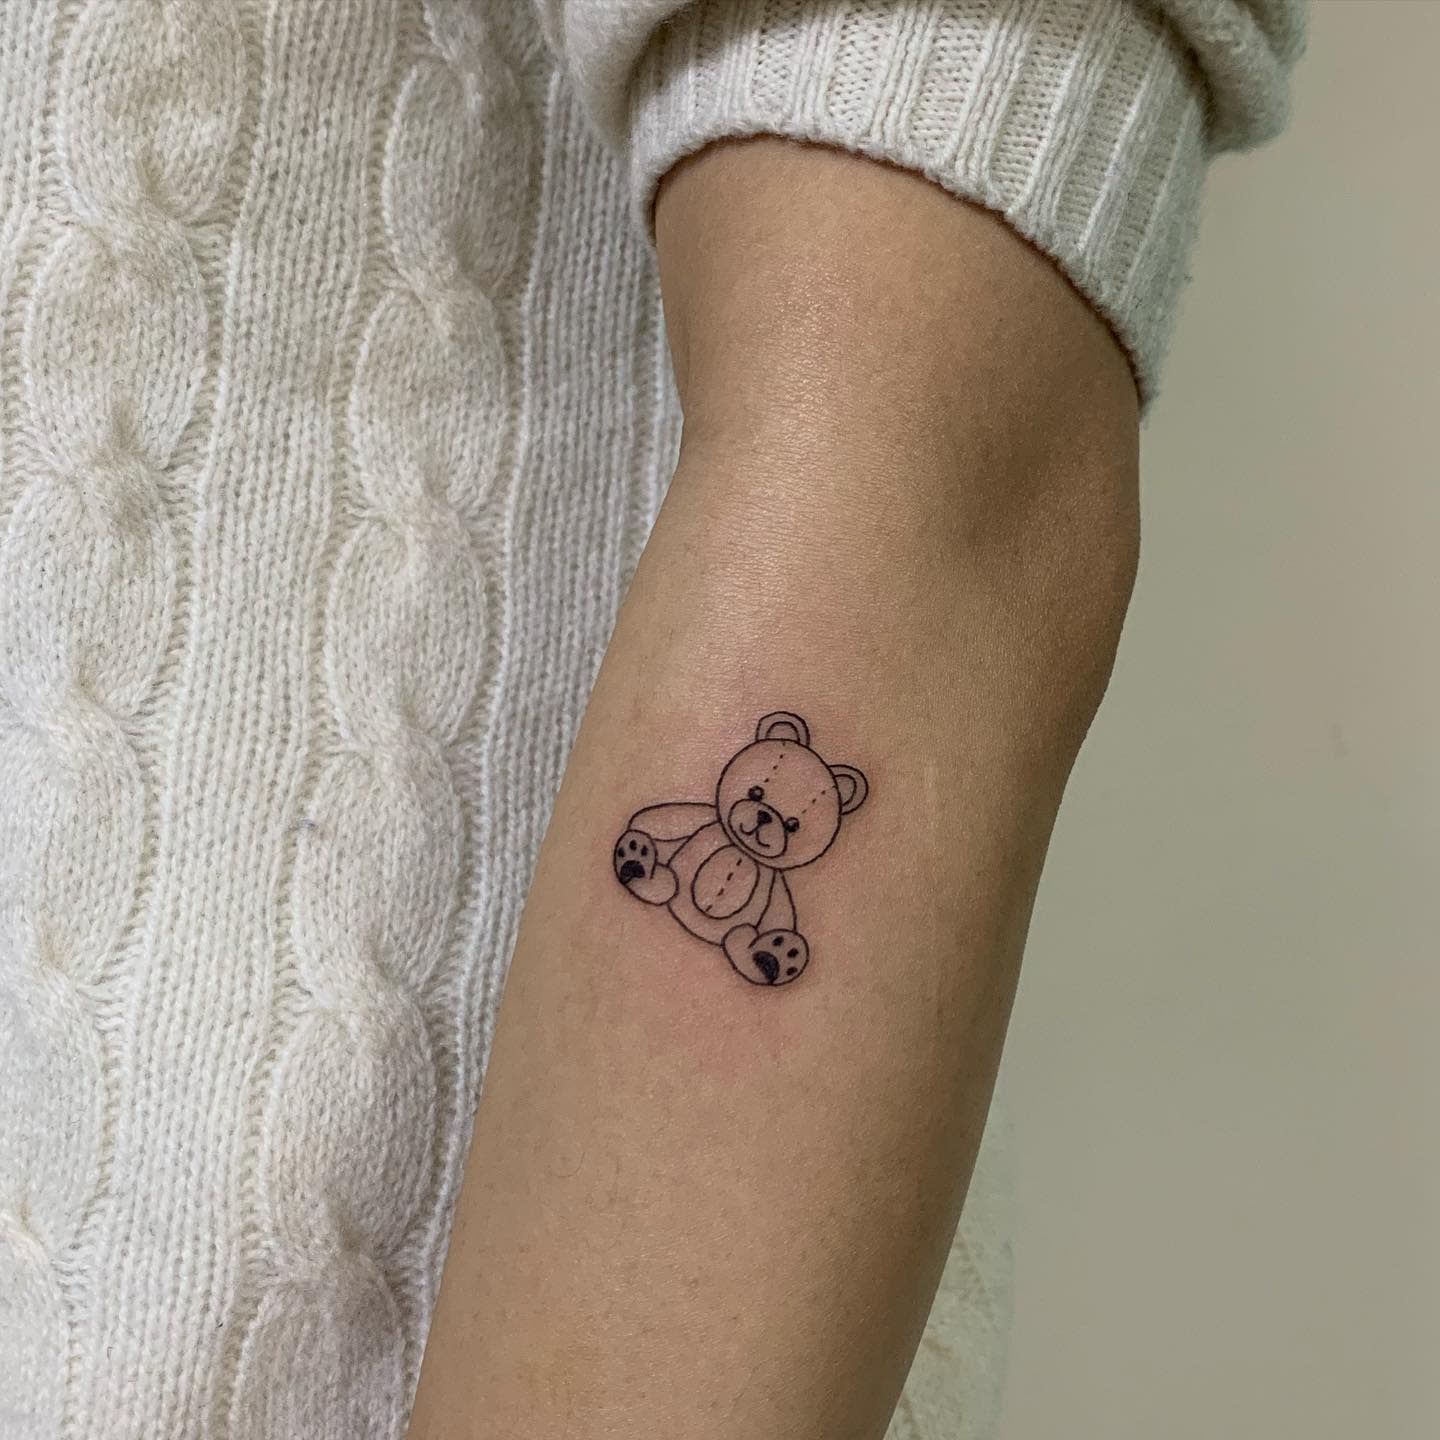 The Top 41 Teddy Bear Tattoo Ideas - [2021 Inspiration Guide]